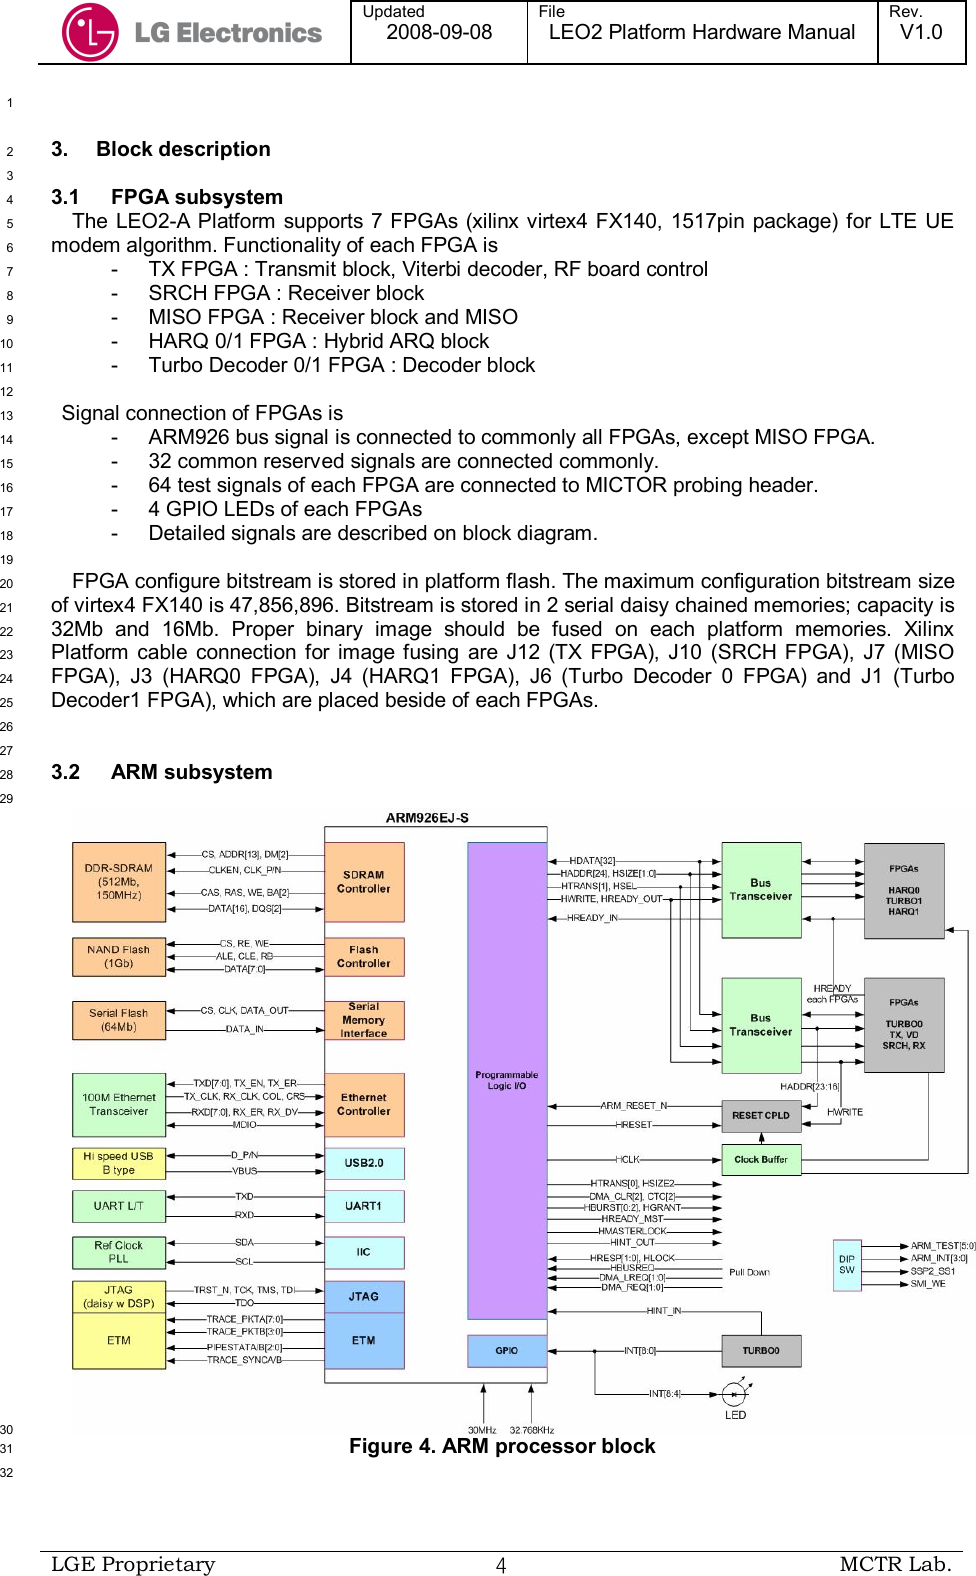  Updated 2008-09-08 File LEO2 Platform Hardware Manual Rev. V1.0   LGE Proprietary  ４ MCTR Lab.   1 3.  Block description 2  3 3.1  FPGA subsystem 4 The LEO2-A Platform  supports 7 FPGAs (xilinx virtex4 FX140, 1517pin package) for LTE UE 5 modem algorithm. Functionality of each FPGA is  6 -  TX FPGA : Transmit block, Viterbi decoder, RF board control 7 -  SRCH FPGA : Receiver block 8 -  MISO FPGA : Receiver block and MISO 9 -  HARQ 0/1 FPGA : Hybrid ARQ block 10 -  Turbo Decoder 0/1 FPGA : Decoder block 11  12 Signal connection of FPGAs is 13 -  ARM926 bus signal is connected to commonly all FPGAs, except MISO FPGA.  14 -  32 common reserved signals are connected commonly. 15 -  64 test signals of each FPGA are connected to MICTOR probing header. 16 -  4 GPIO LEDs of each FPGAs 17 -  Detailed signals are described on block diagram. 18  19 FPGA configure bitstream is stored in platform flash. The maximum configuration bitstream size 20 of virtex4 FX140 is 47,856,896. Bitstream is stored in 2 serial daisy chained memories; capacity is 21 32Mb  and  16Mb.  Proper  binary  image  should  be  fused  on  each  platform  memories.  Xilinx 22 Platform  cable  connection  for image  fusing  are  J12  (TX  FPGA),  J10  (SRCH  FPGA),  J7  (MISO 23 FPGA),  J3  (HARQ0  FPGA),  J4  (HARQ1  FPGA),  J6  (Turbo  Decoder  0  FPGA)  and  J1  (Turbo 24 Decoder1 FPGA), which are placed beside of each FPGAs. 25  26  27 3.2  ARM subsystem 28  29  30 Figure 4. ARM processor block 31  32 